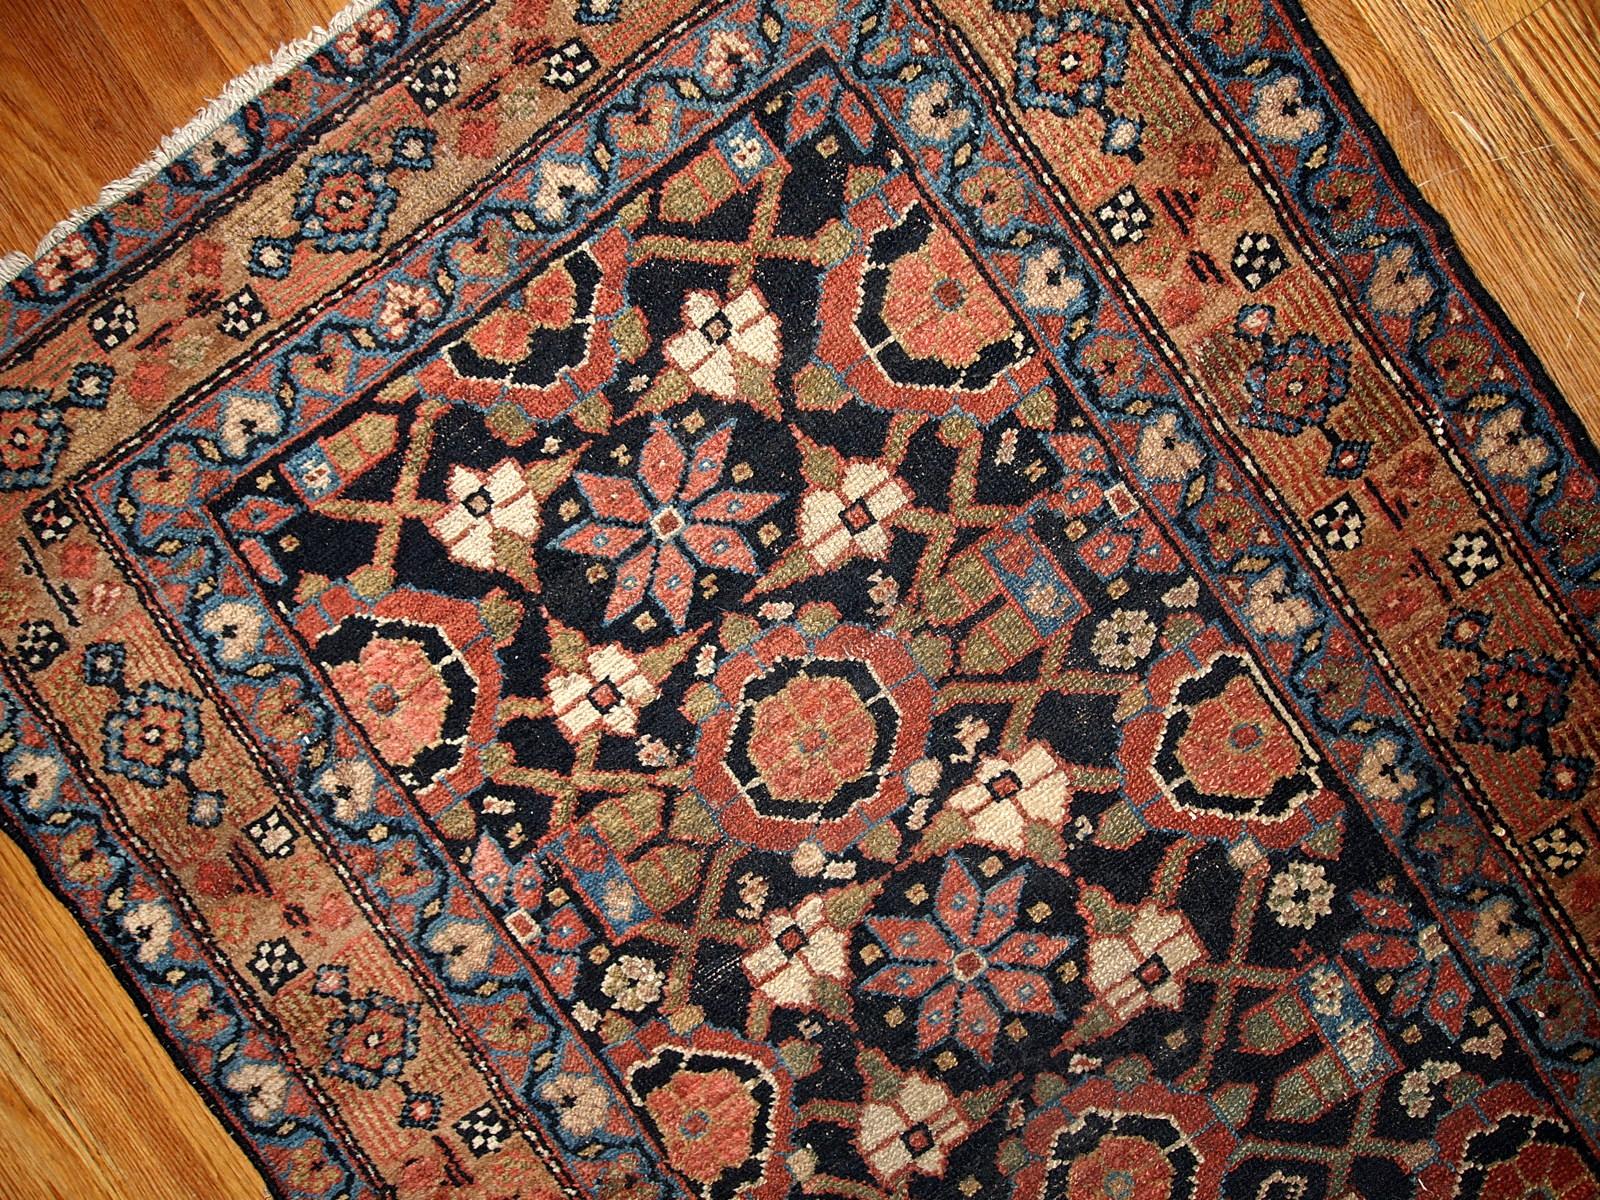 Antique Hamadan style runner 3' x 13' (91cm x 396cm) in good original condition. This rug is in black and red shades.